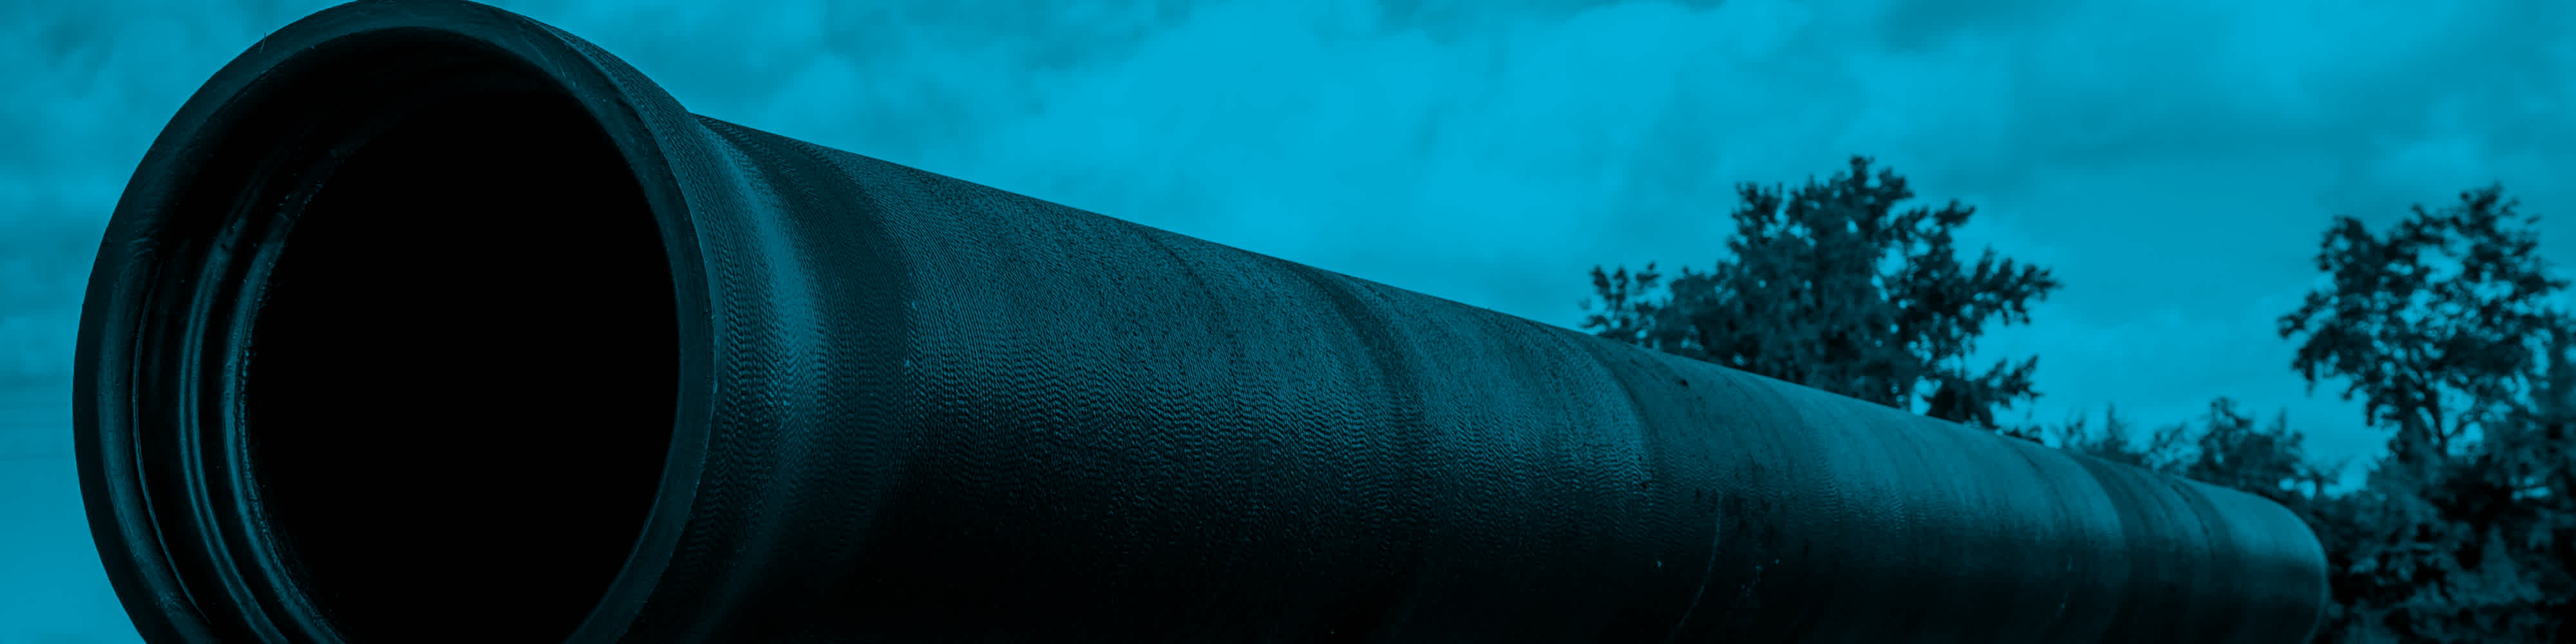 Ductile Iron Pipe blue